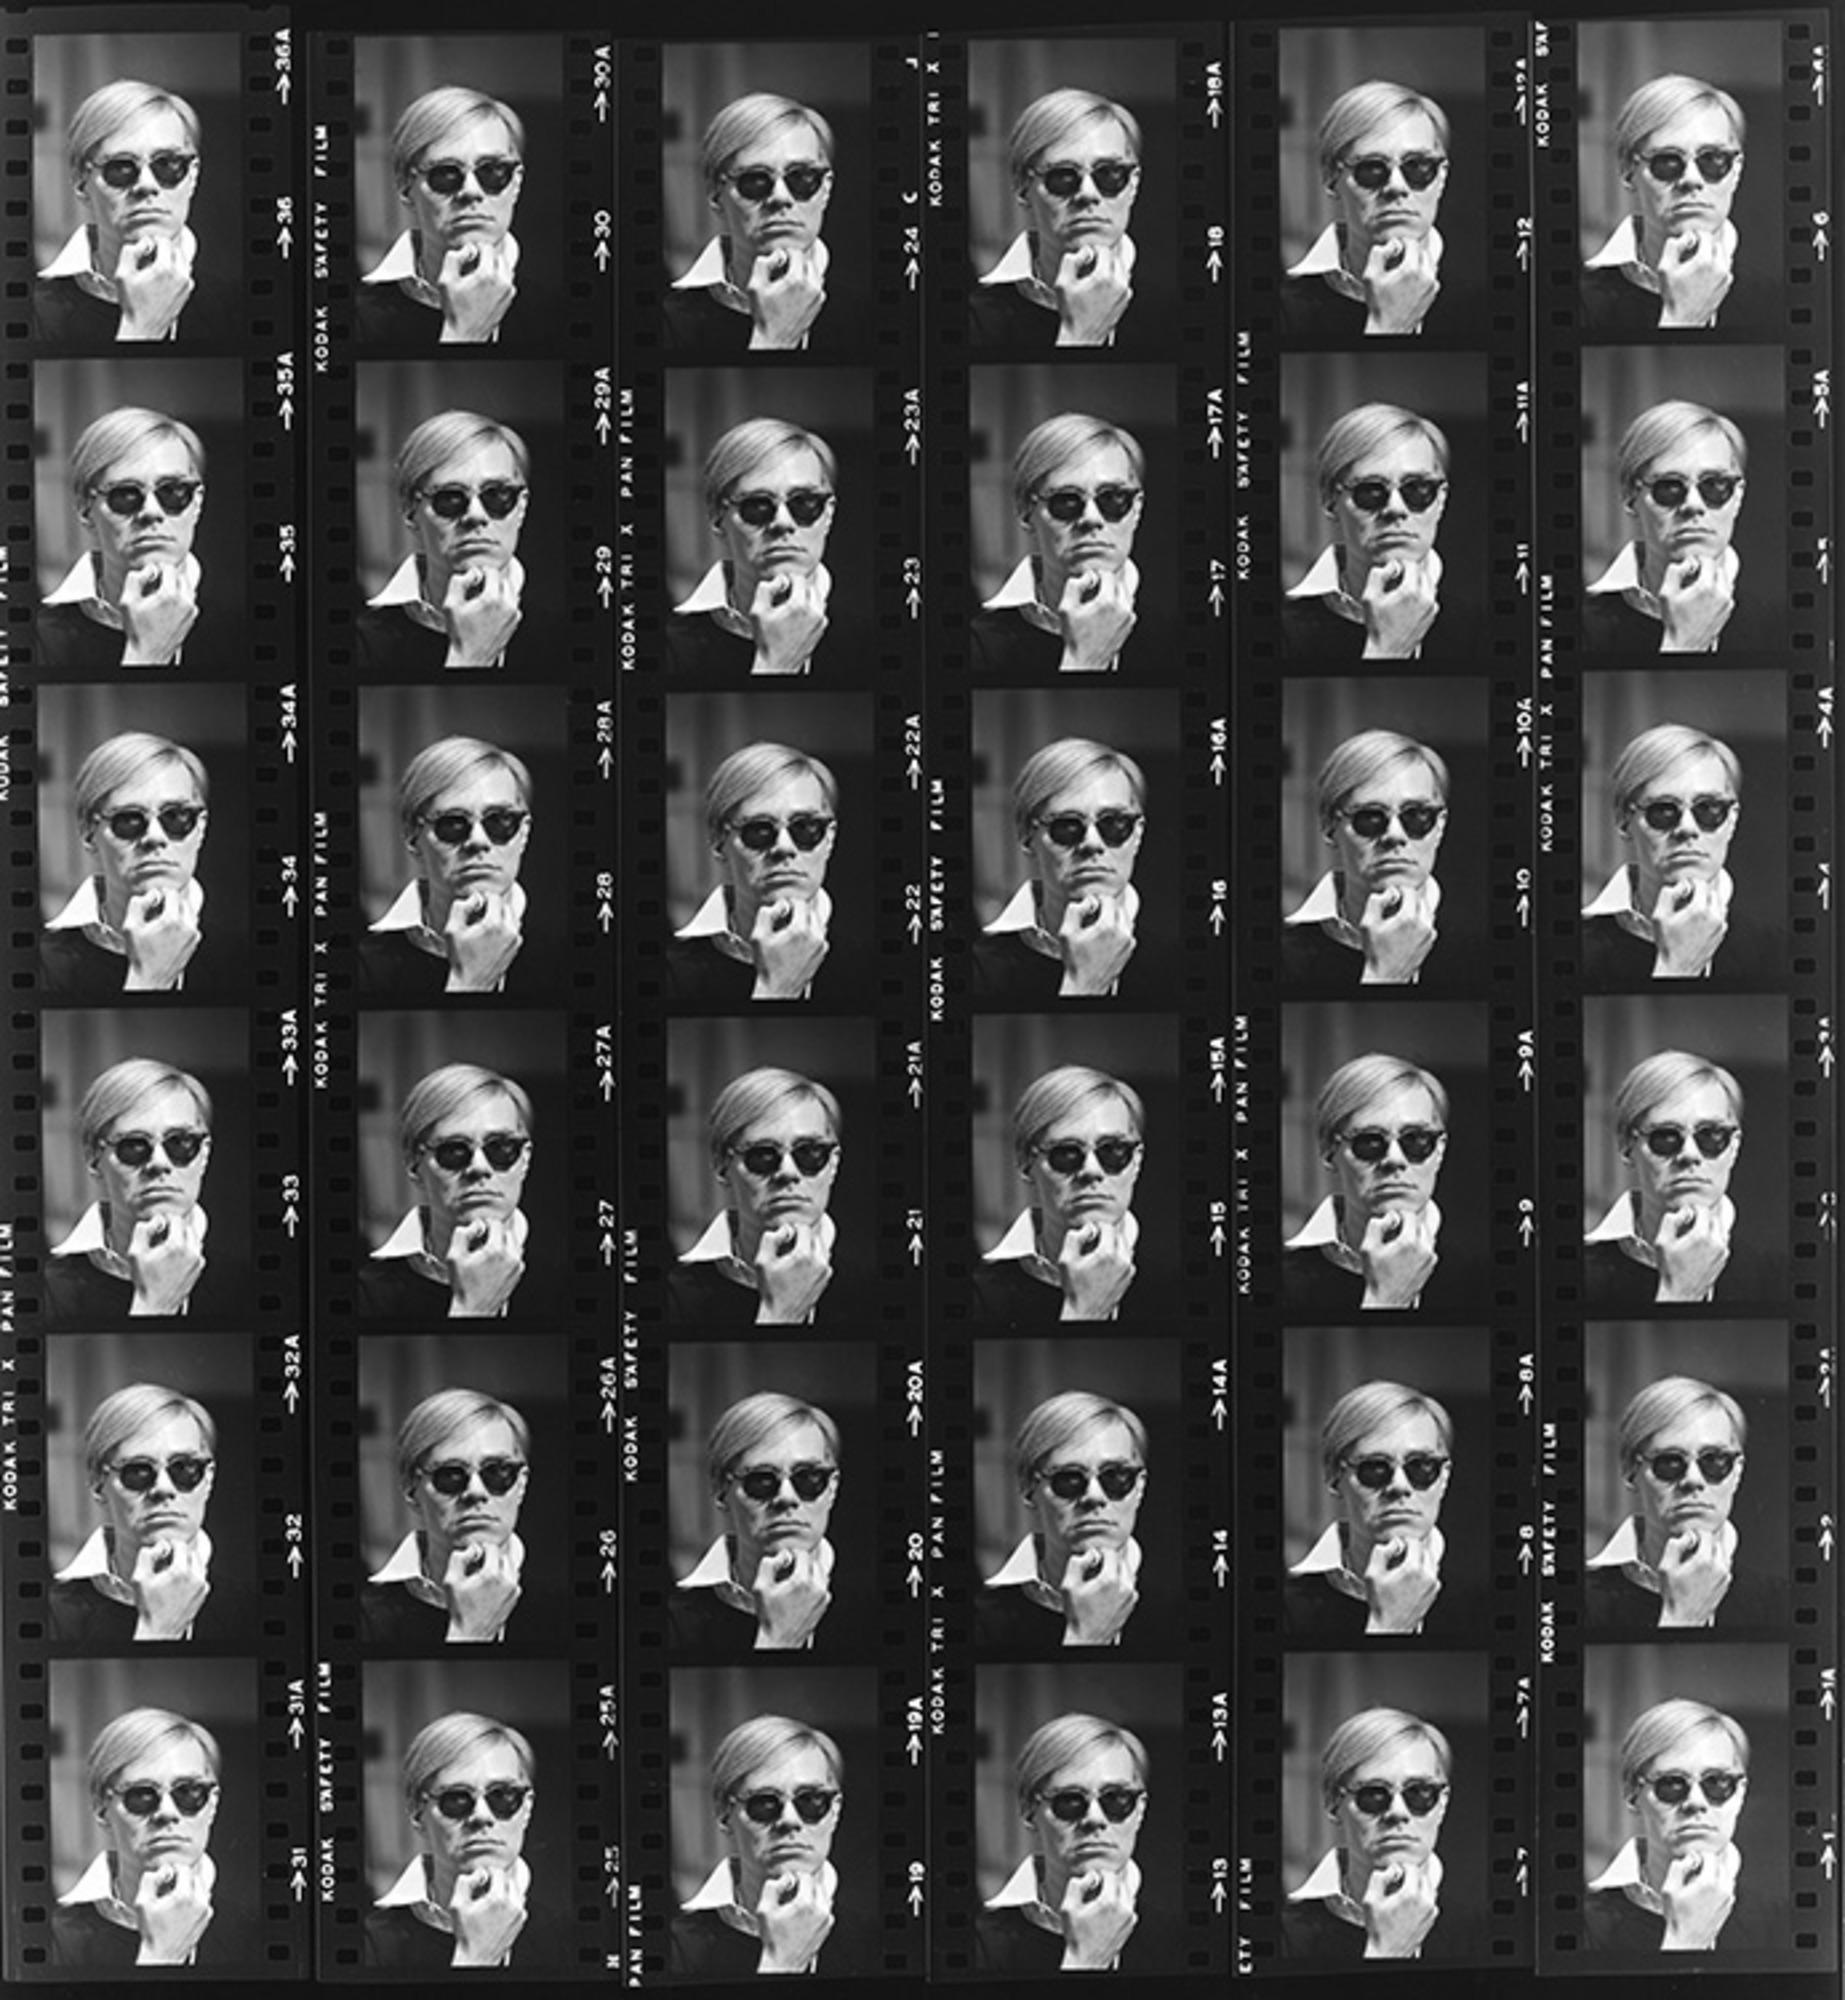 Lawrence Fried - Andy Warhol Contact Sheet, Photography 1965, Printed After